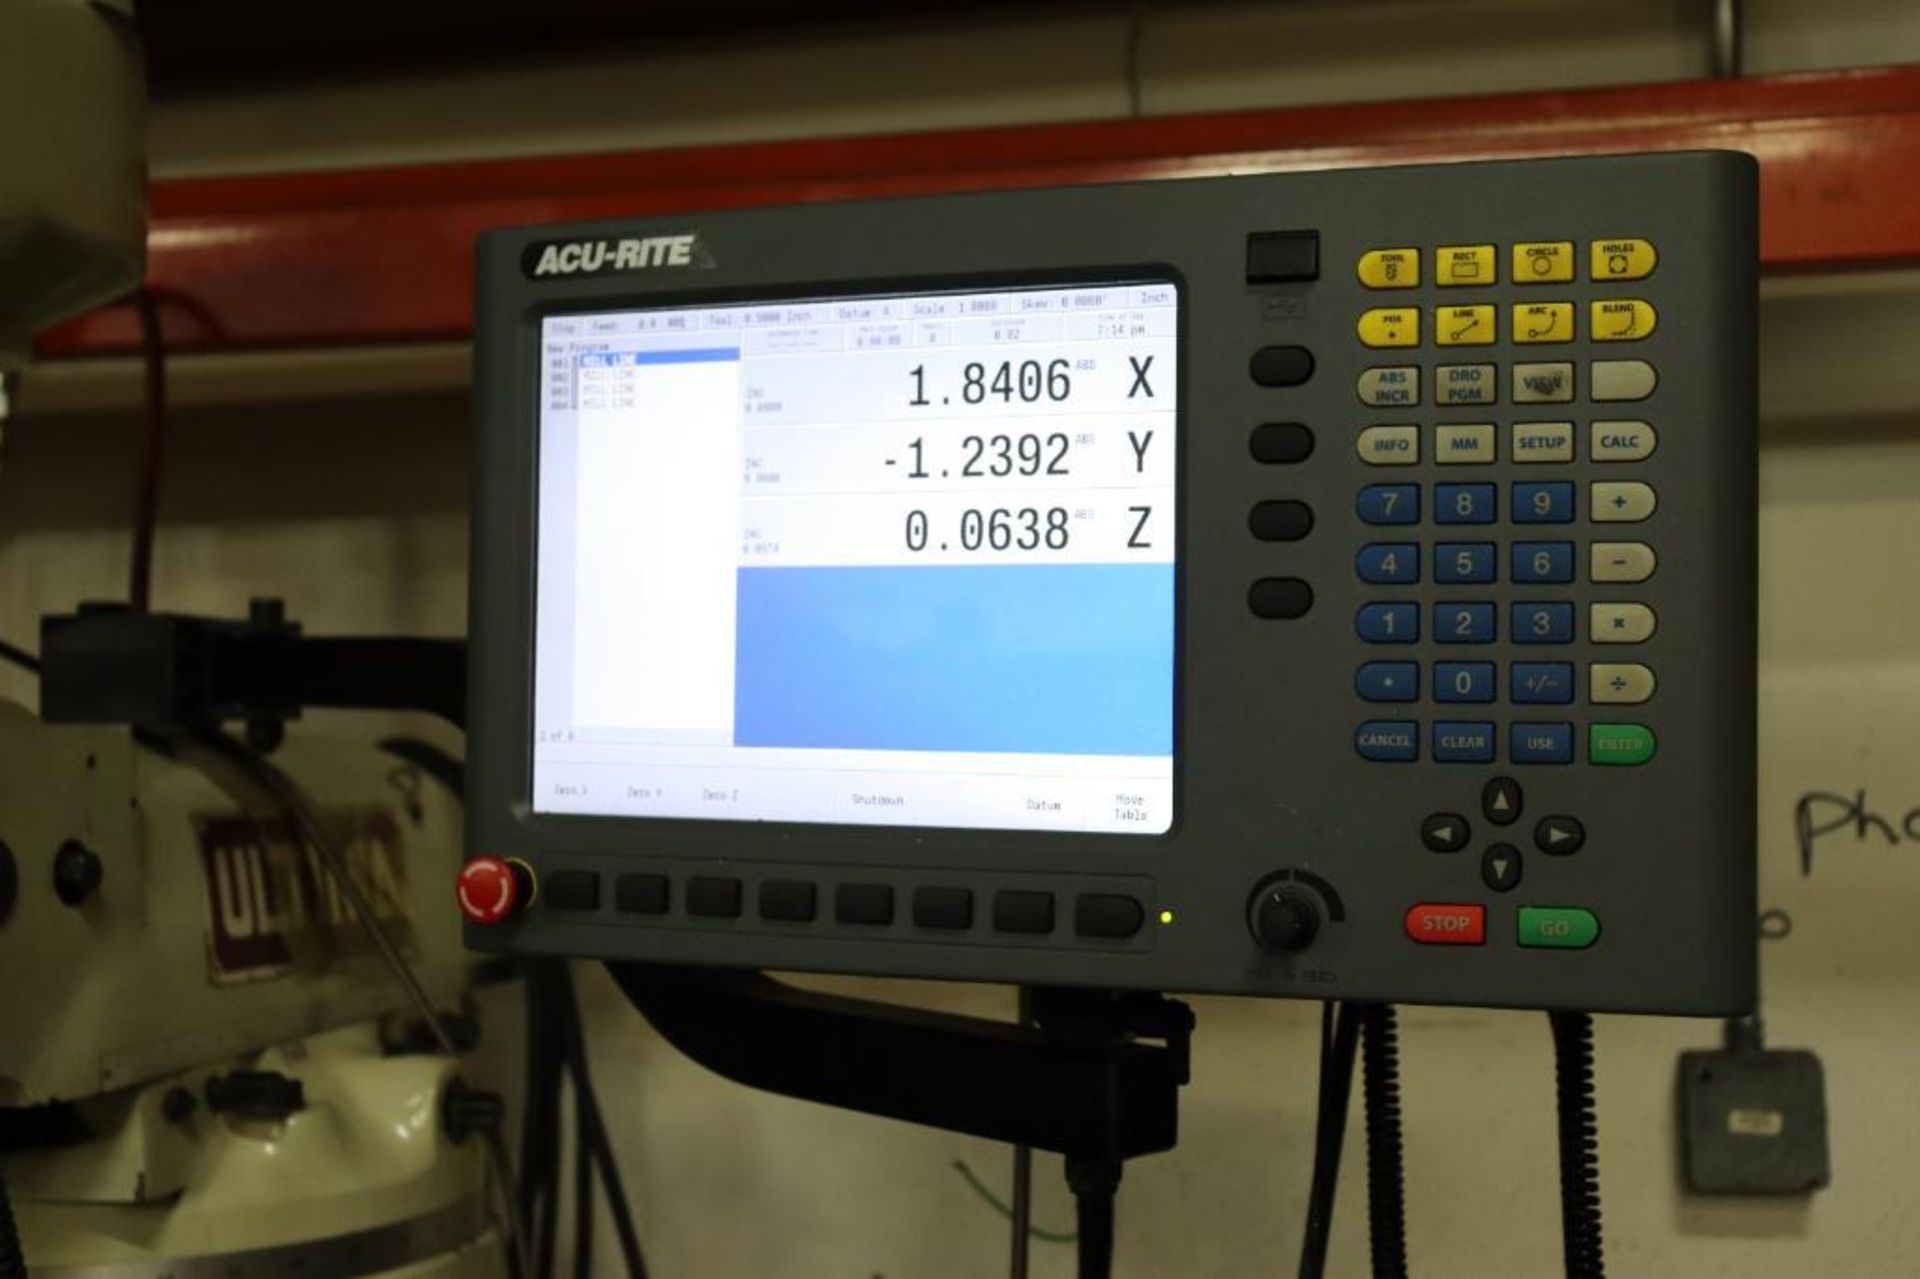 Acer Ultima 3VS Acu-Rite 2 Axis CNC Mill - Image 11 of 19